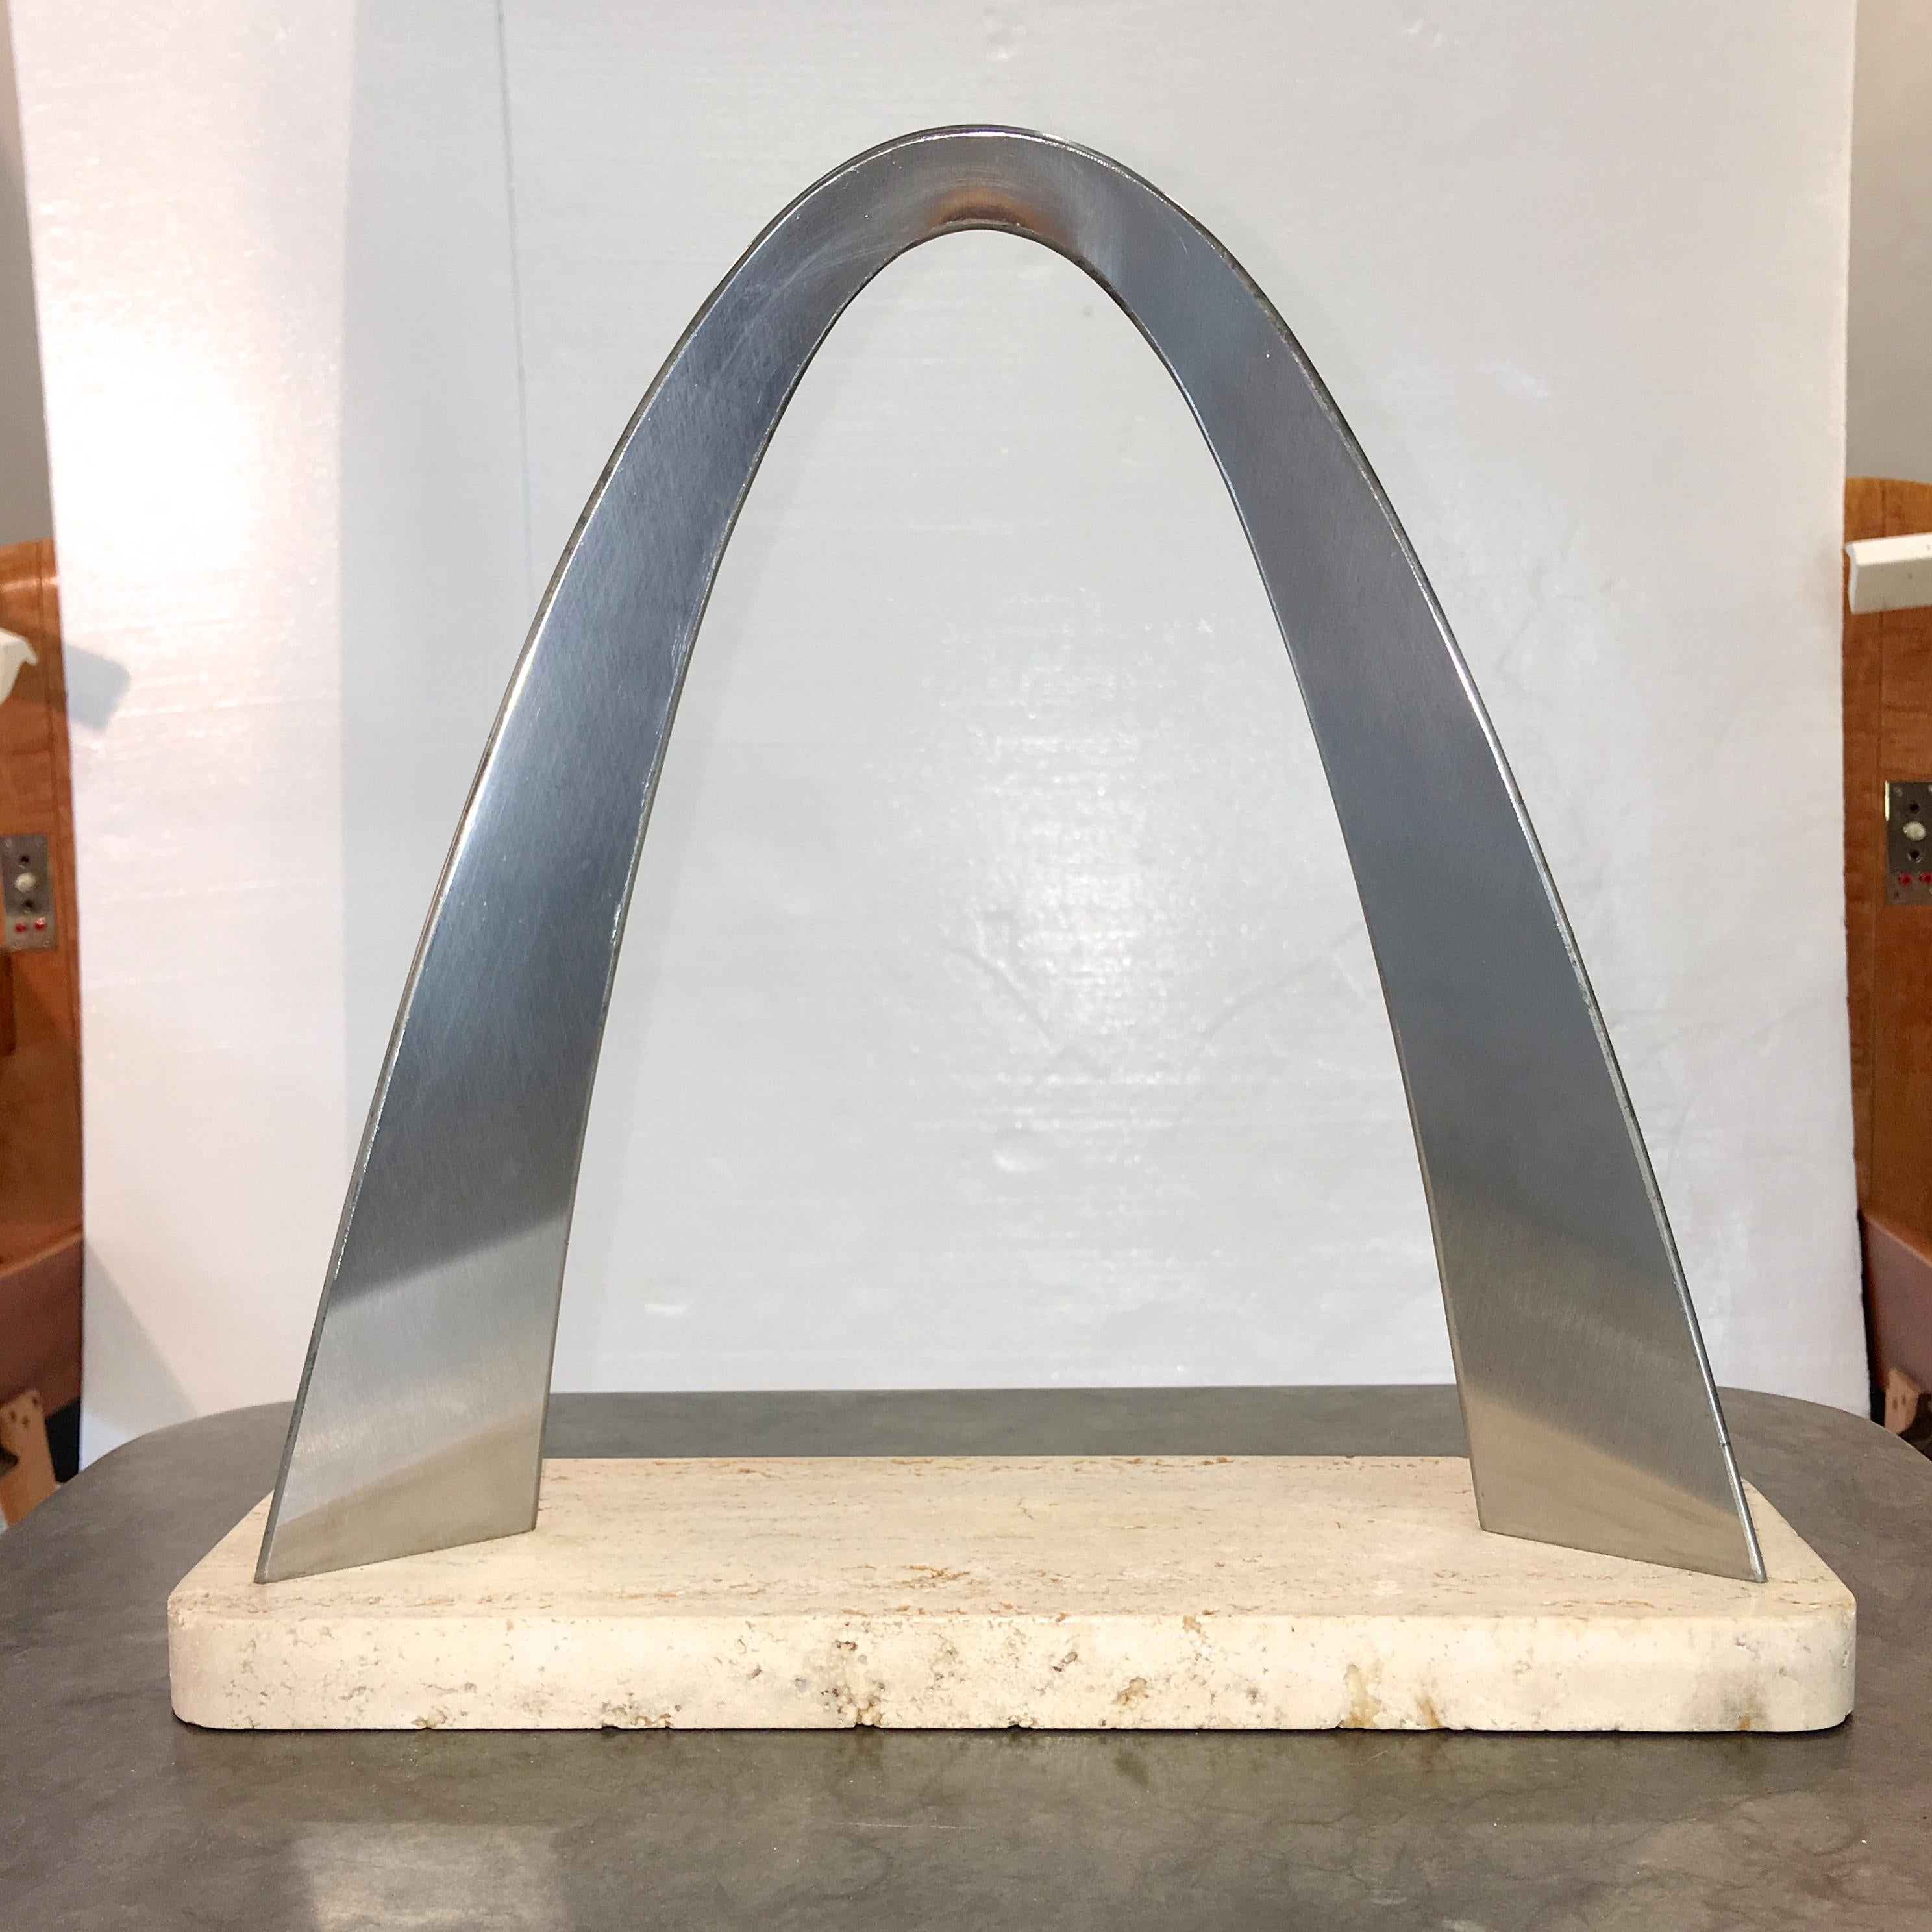 Vintage architectural scale model of Eero Saarinen's Gateway Arch in St. Louis, MO. Brushed stainless steel on travertine base. Dimensions: 13.5 in x 13.5 in x 4 in.

The Gateway Arch is a 630-foot (192 m) monument in St. Louis in the U.S. state